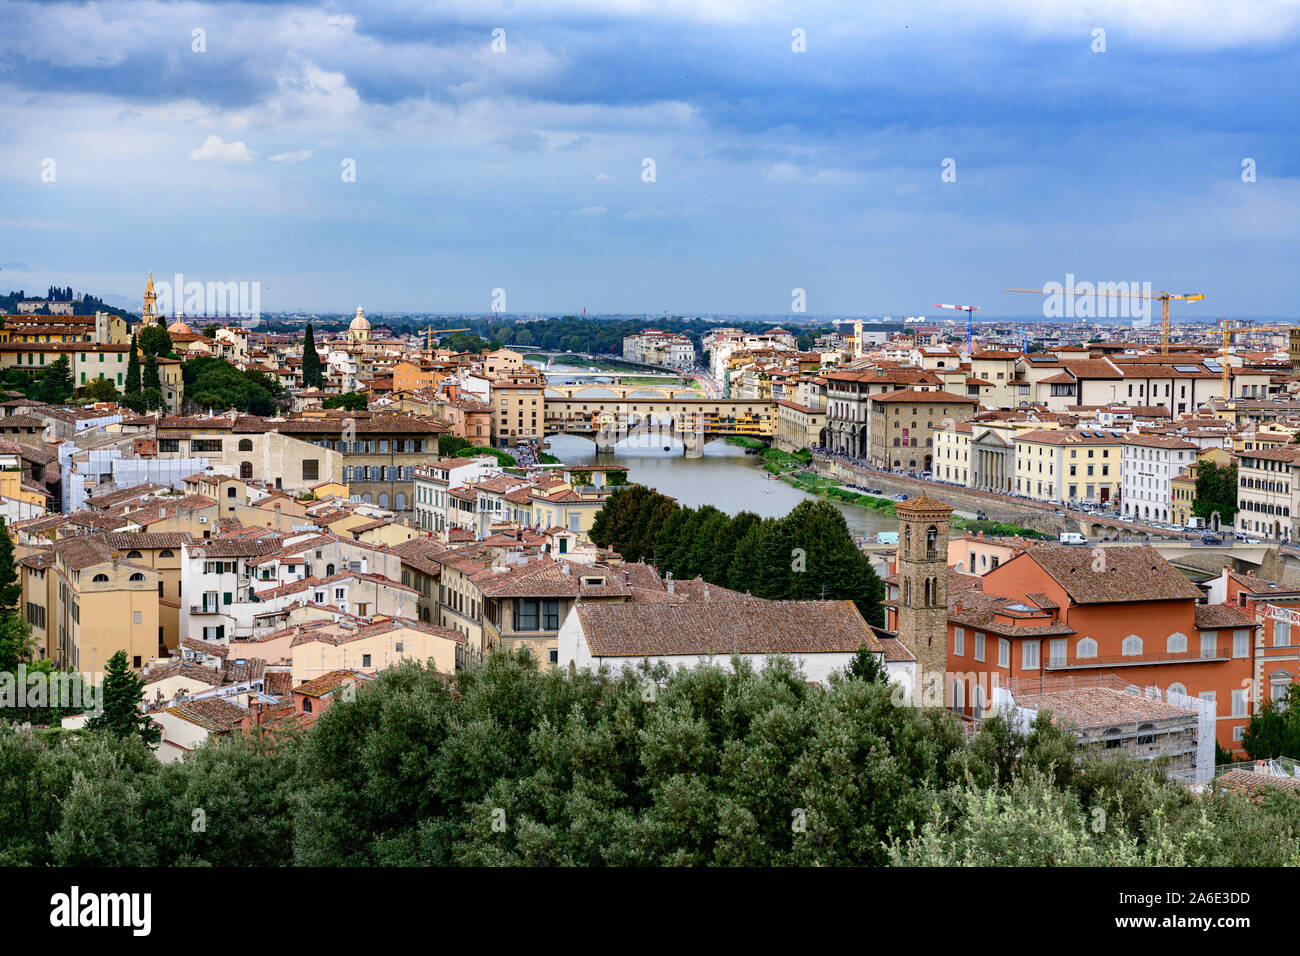 Overview of the City of Florence Tuscany Italy with the most famous bridge Ponte Vecchio in the middle ground. Stock Photo